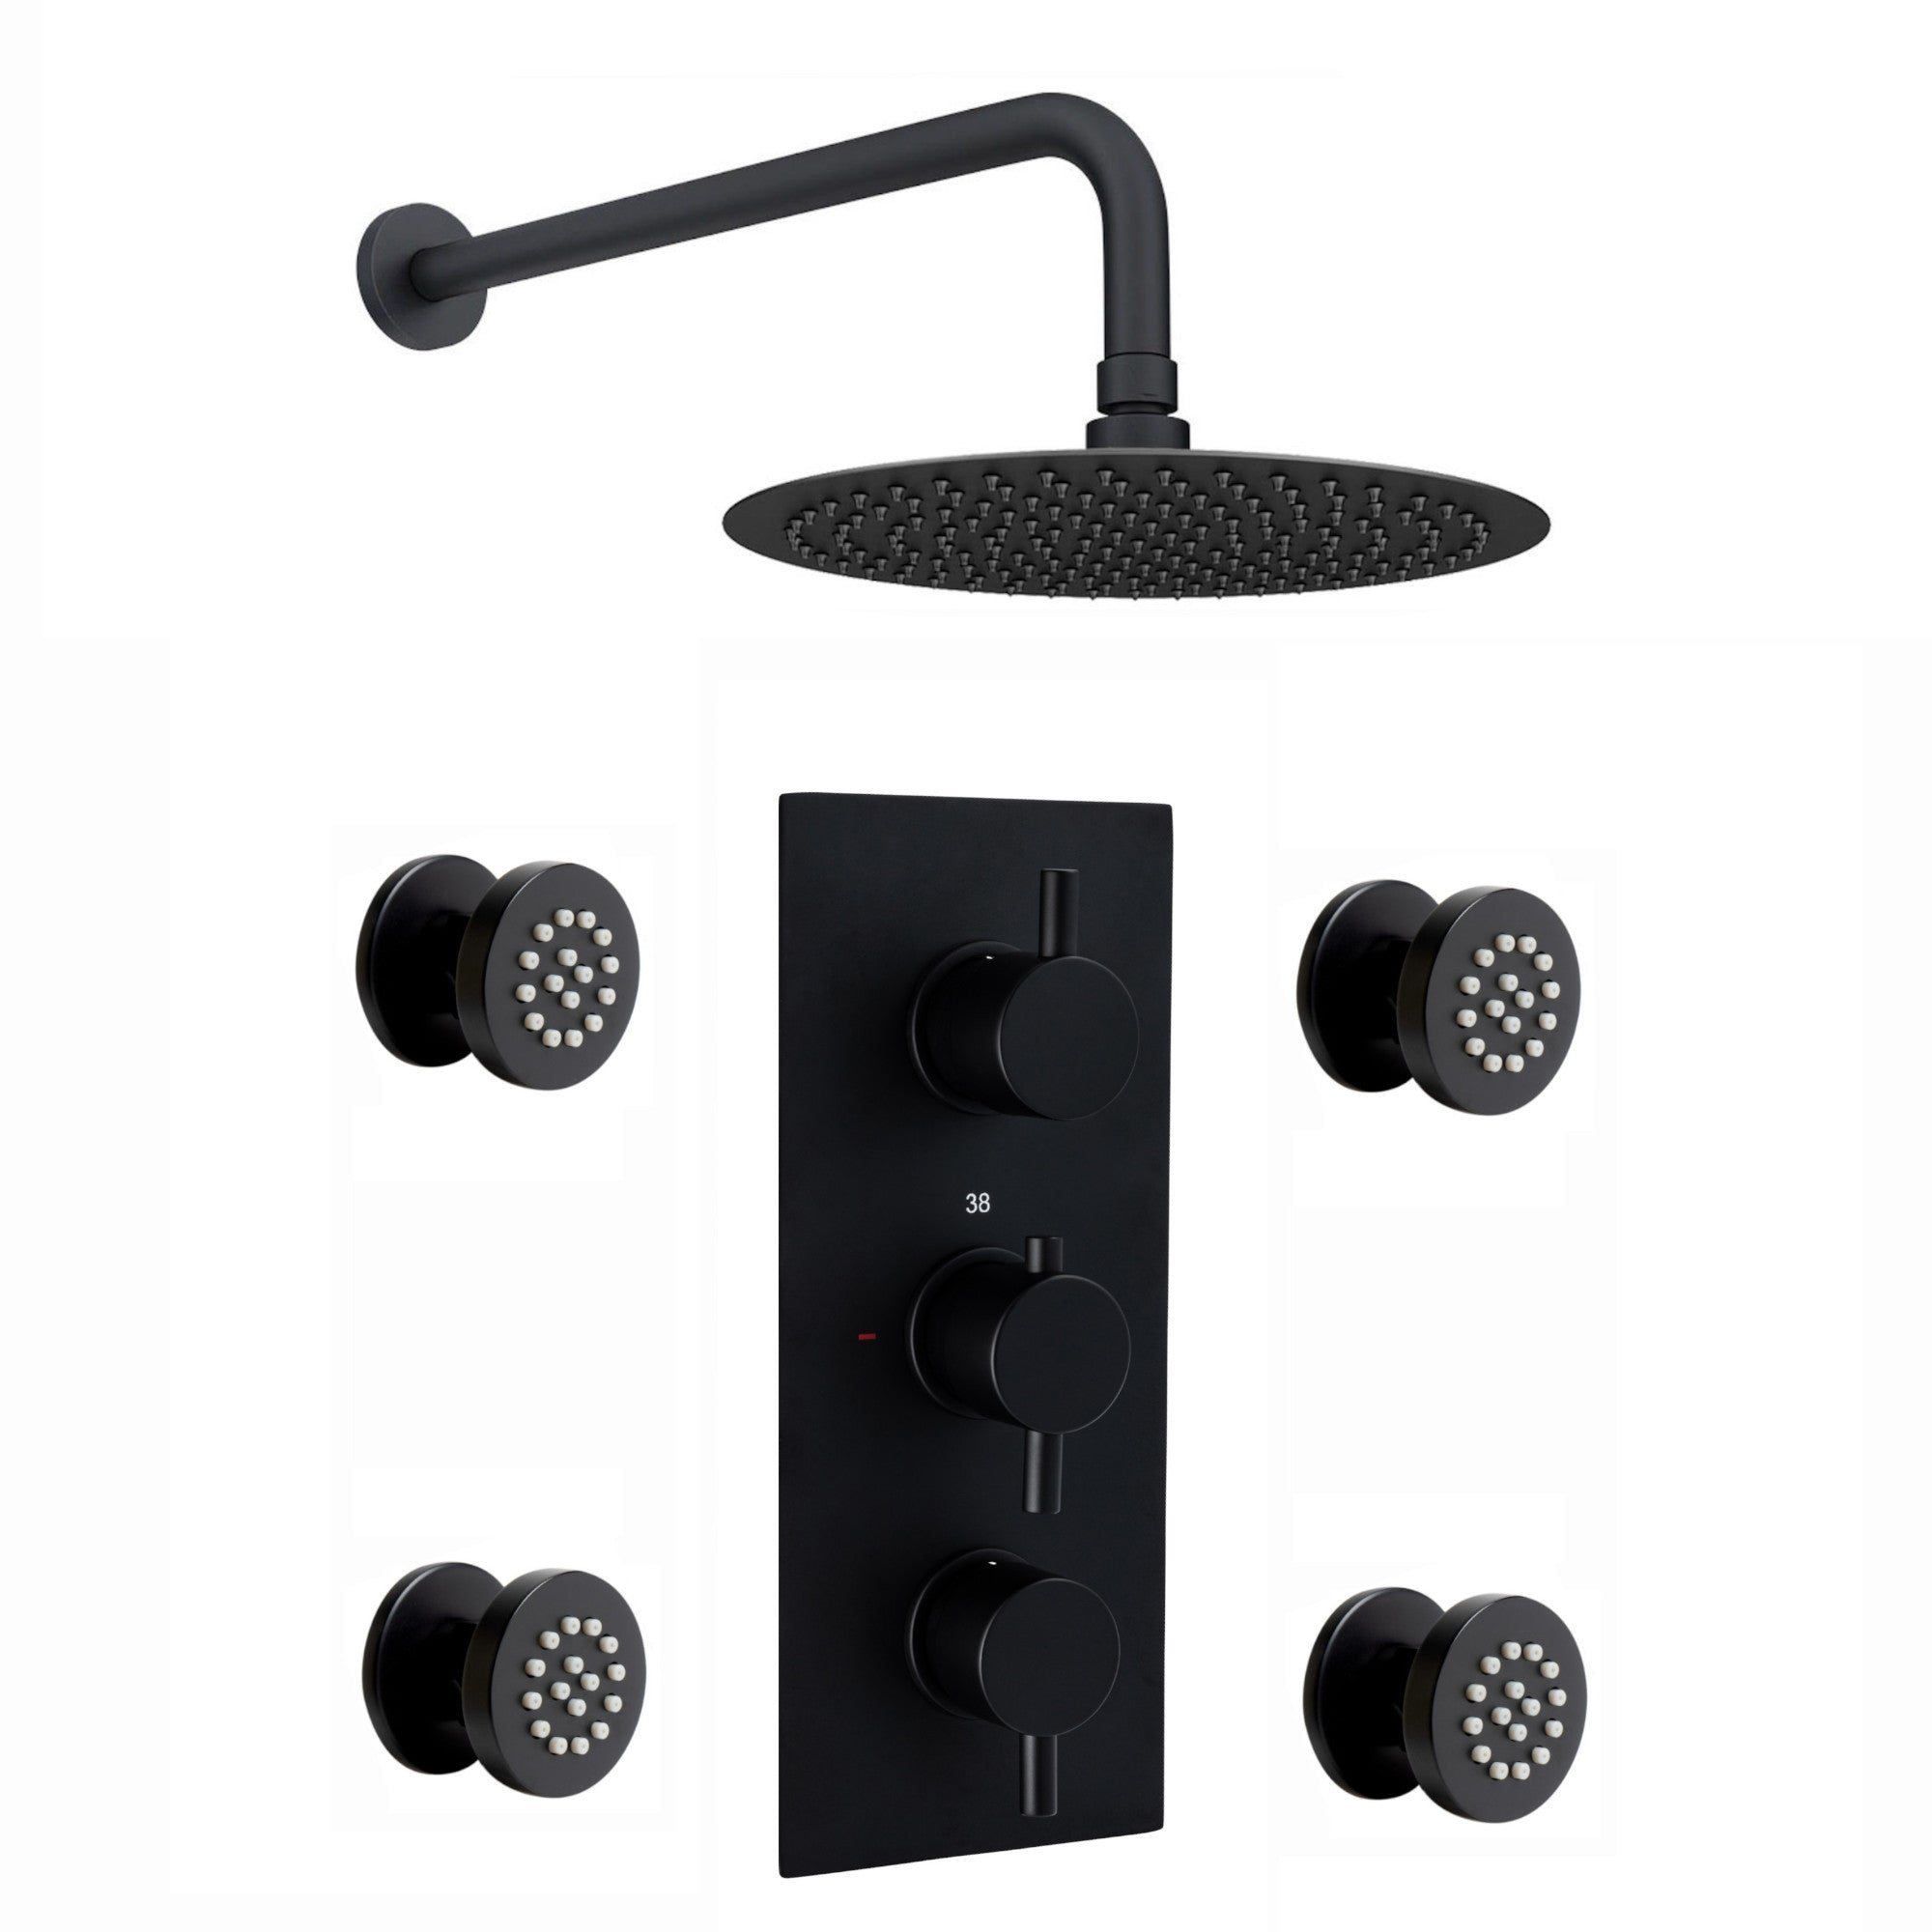 Venice Contemporary Round Concealed Thermostatic Shower Set Incl. Triple Valve, Wall Fixed 8" Shower Head, 4 Spa Body Jets - Black (2 Outlet)